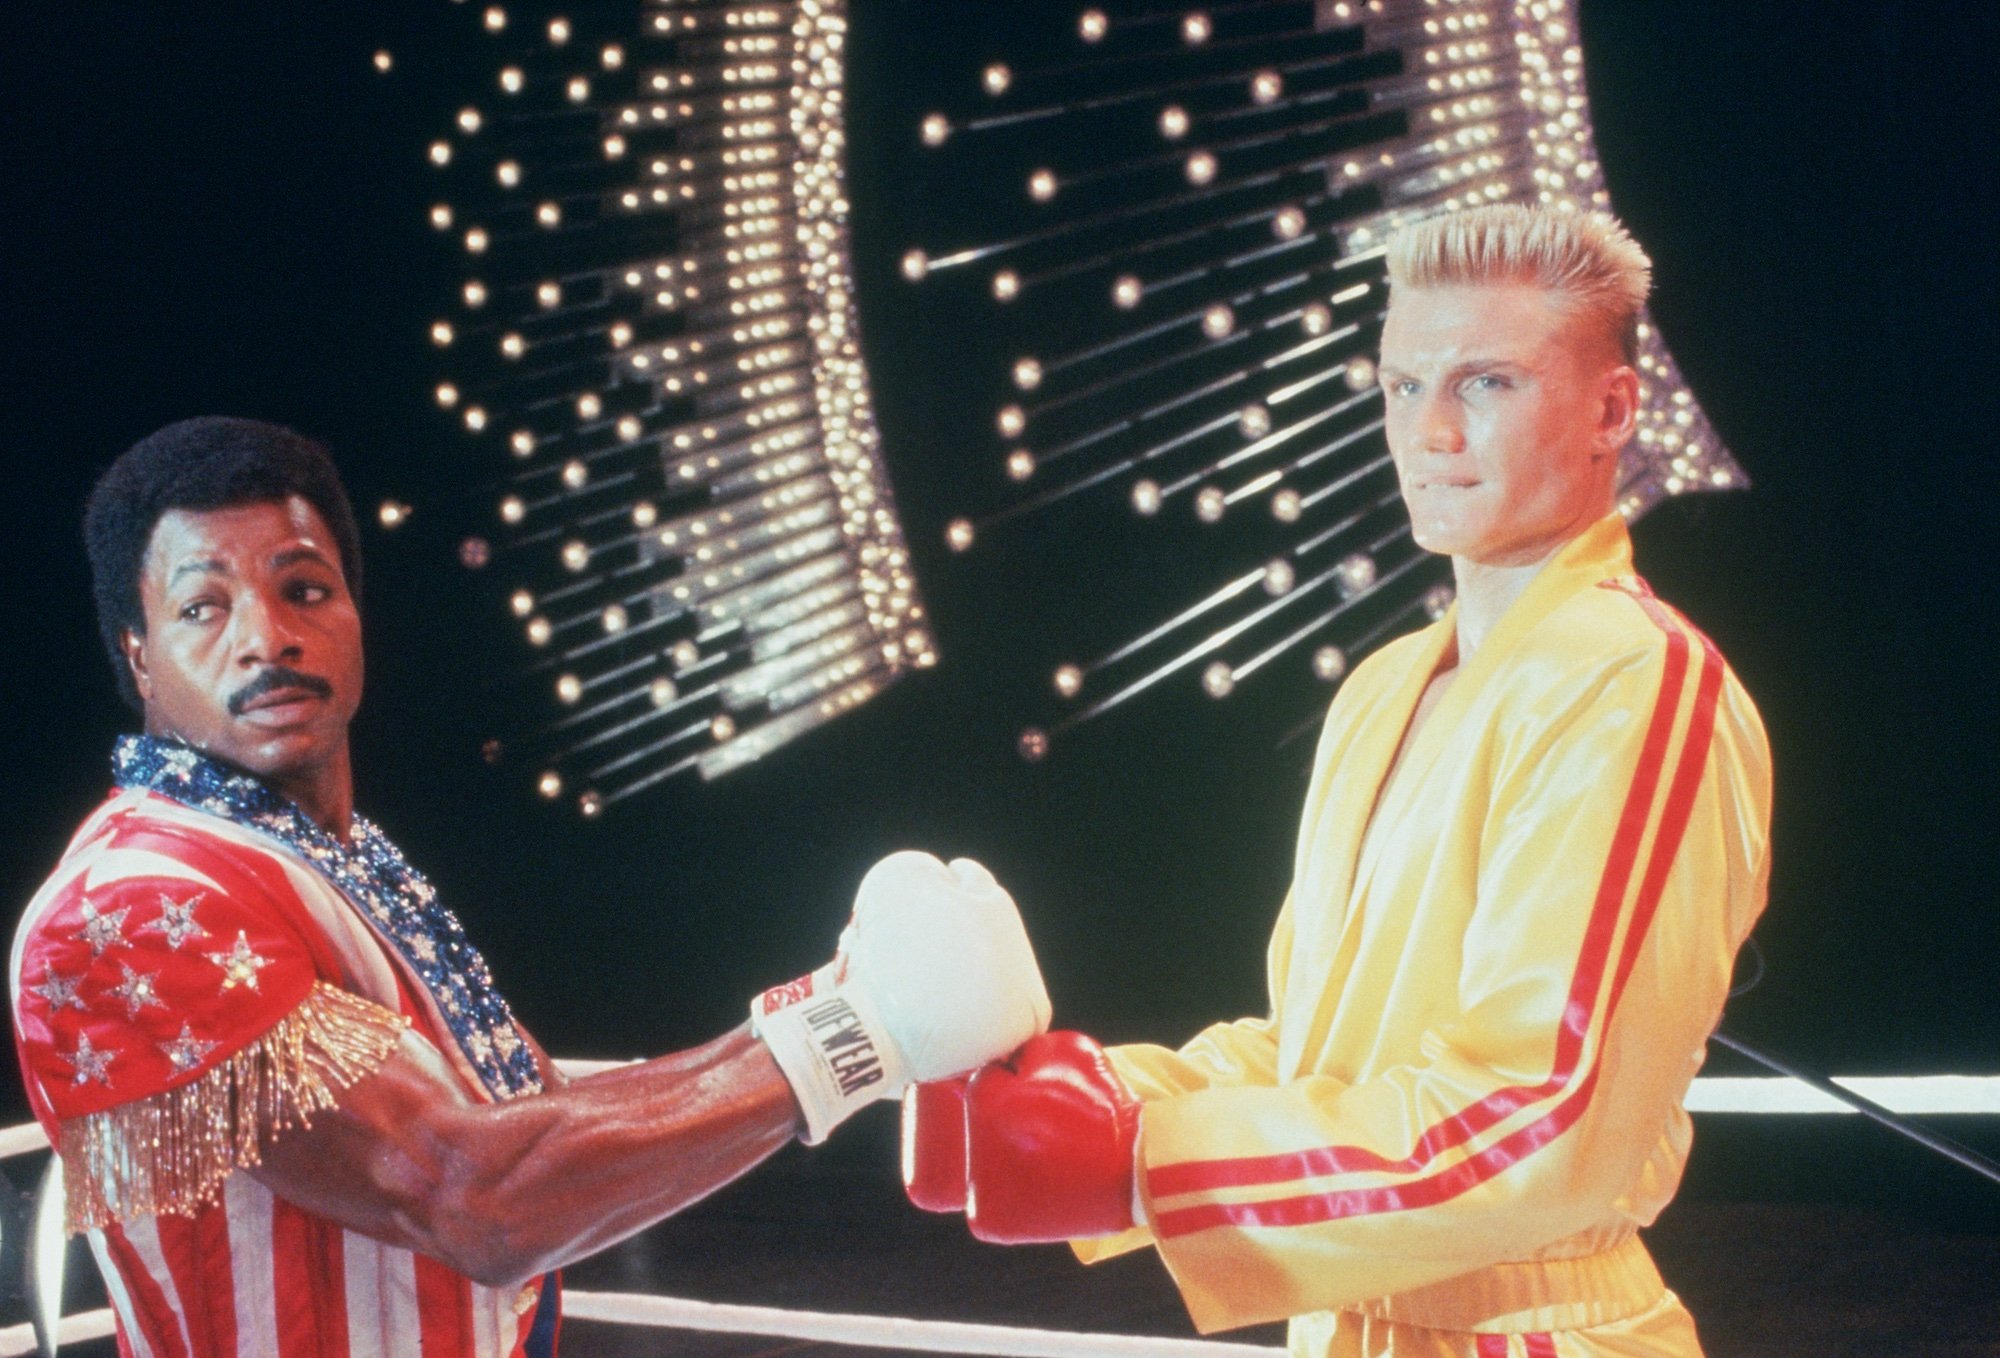 Rocky IV: Carl Weathers and Dolph Lundgren touch gloves